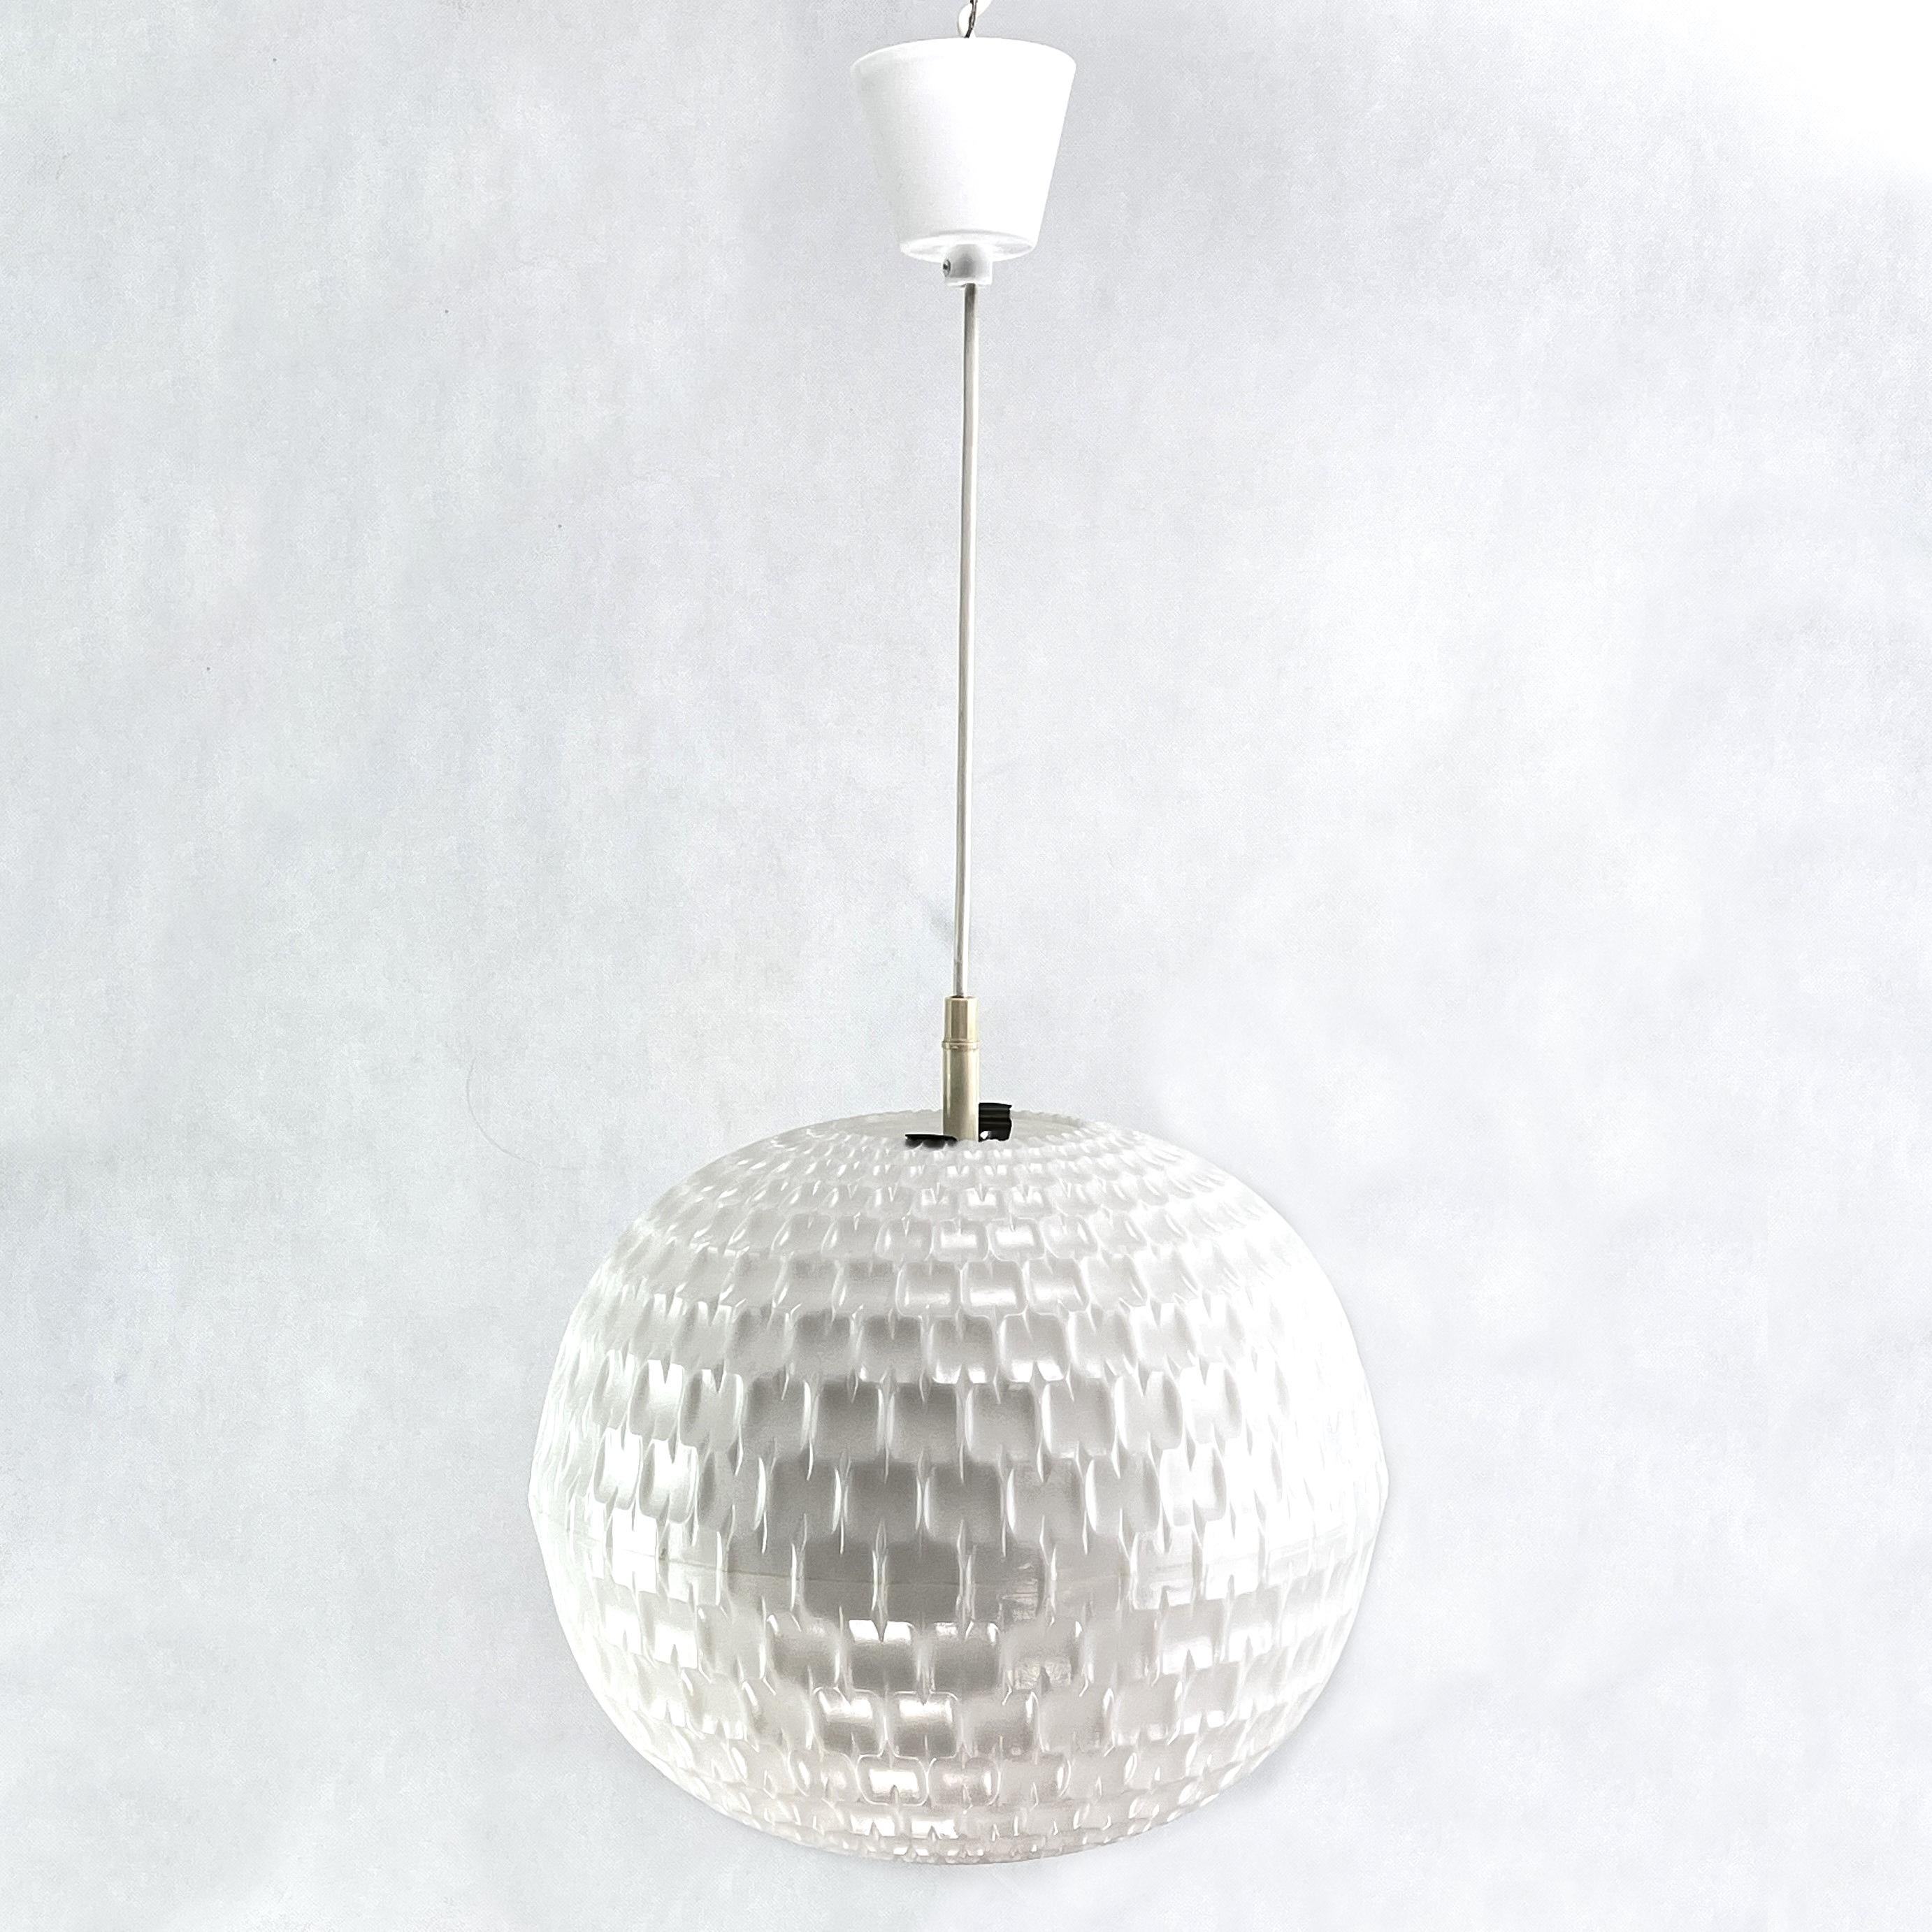 Mid-Century Modern Ceiling Lamp from Erco by Gangkofner, 1960s